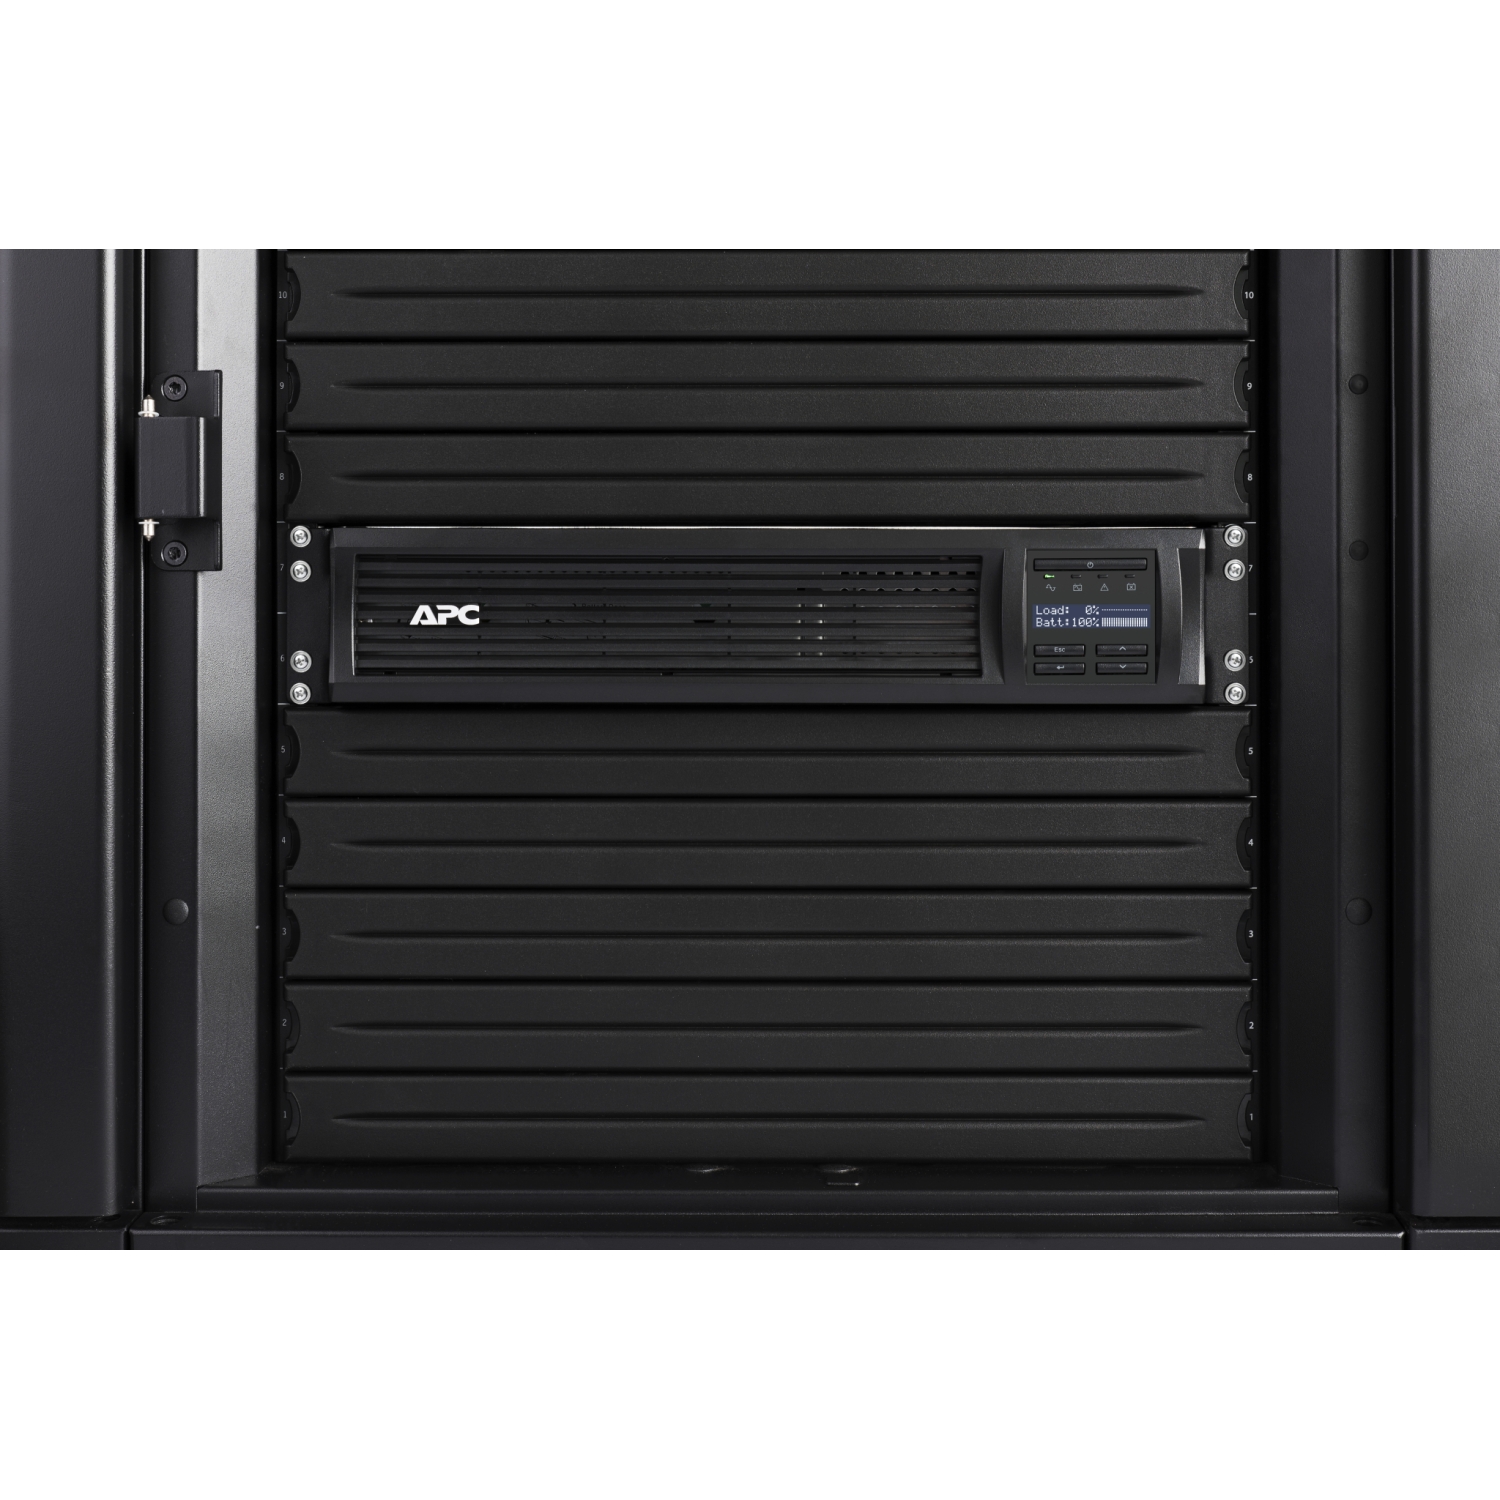 APC by Schneider Electric Smart-UPS SMX 1500VA Tower/Rack Convertible UPS -  SMX1500RM2UCNC - UPS Battery Backups 